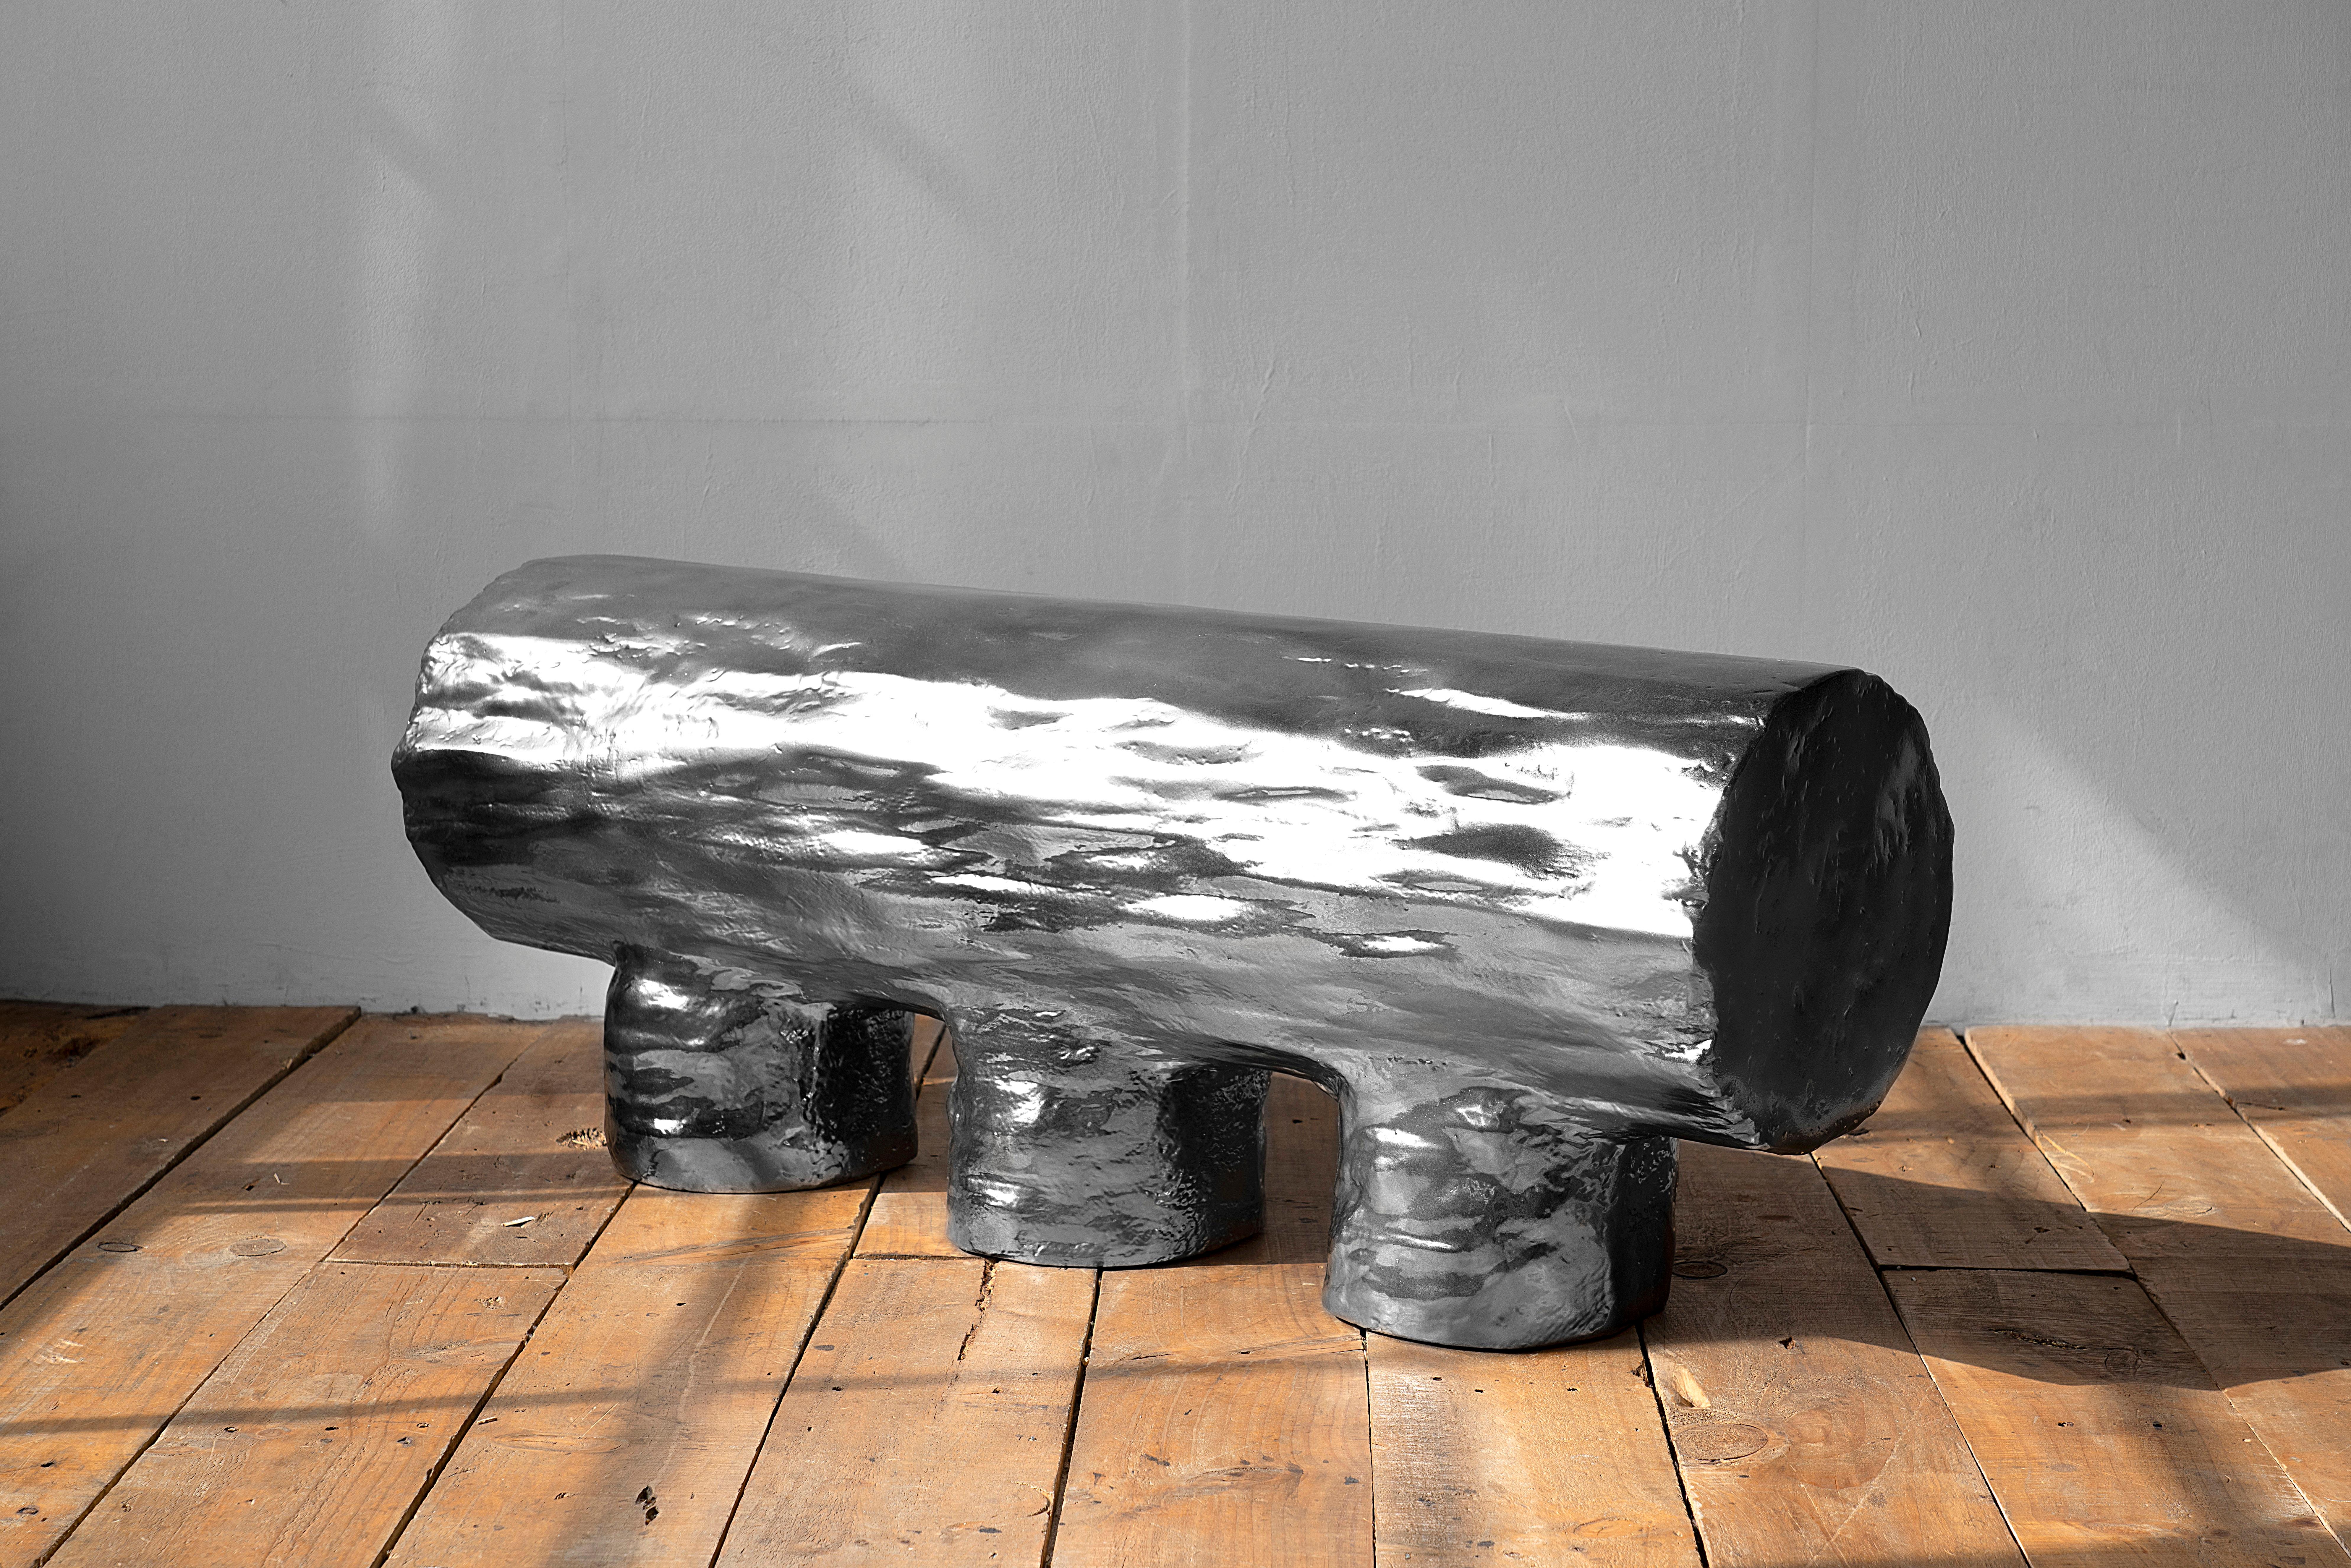 Sculptural bench by Dongwook Choi
Crest and Trough series
Dimensions: W 125 x D 39 x H 40 cm
Materials: Urethane coated EPS, Silver Coated

There may be a visual difference in color depending on the finish condition.

When two waves encounter